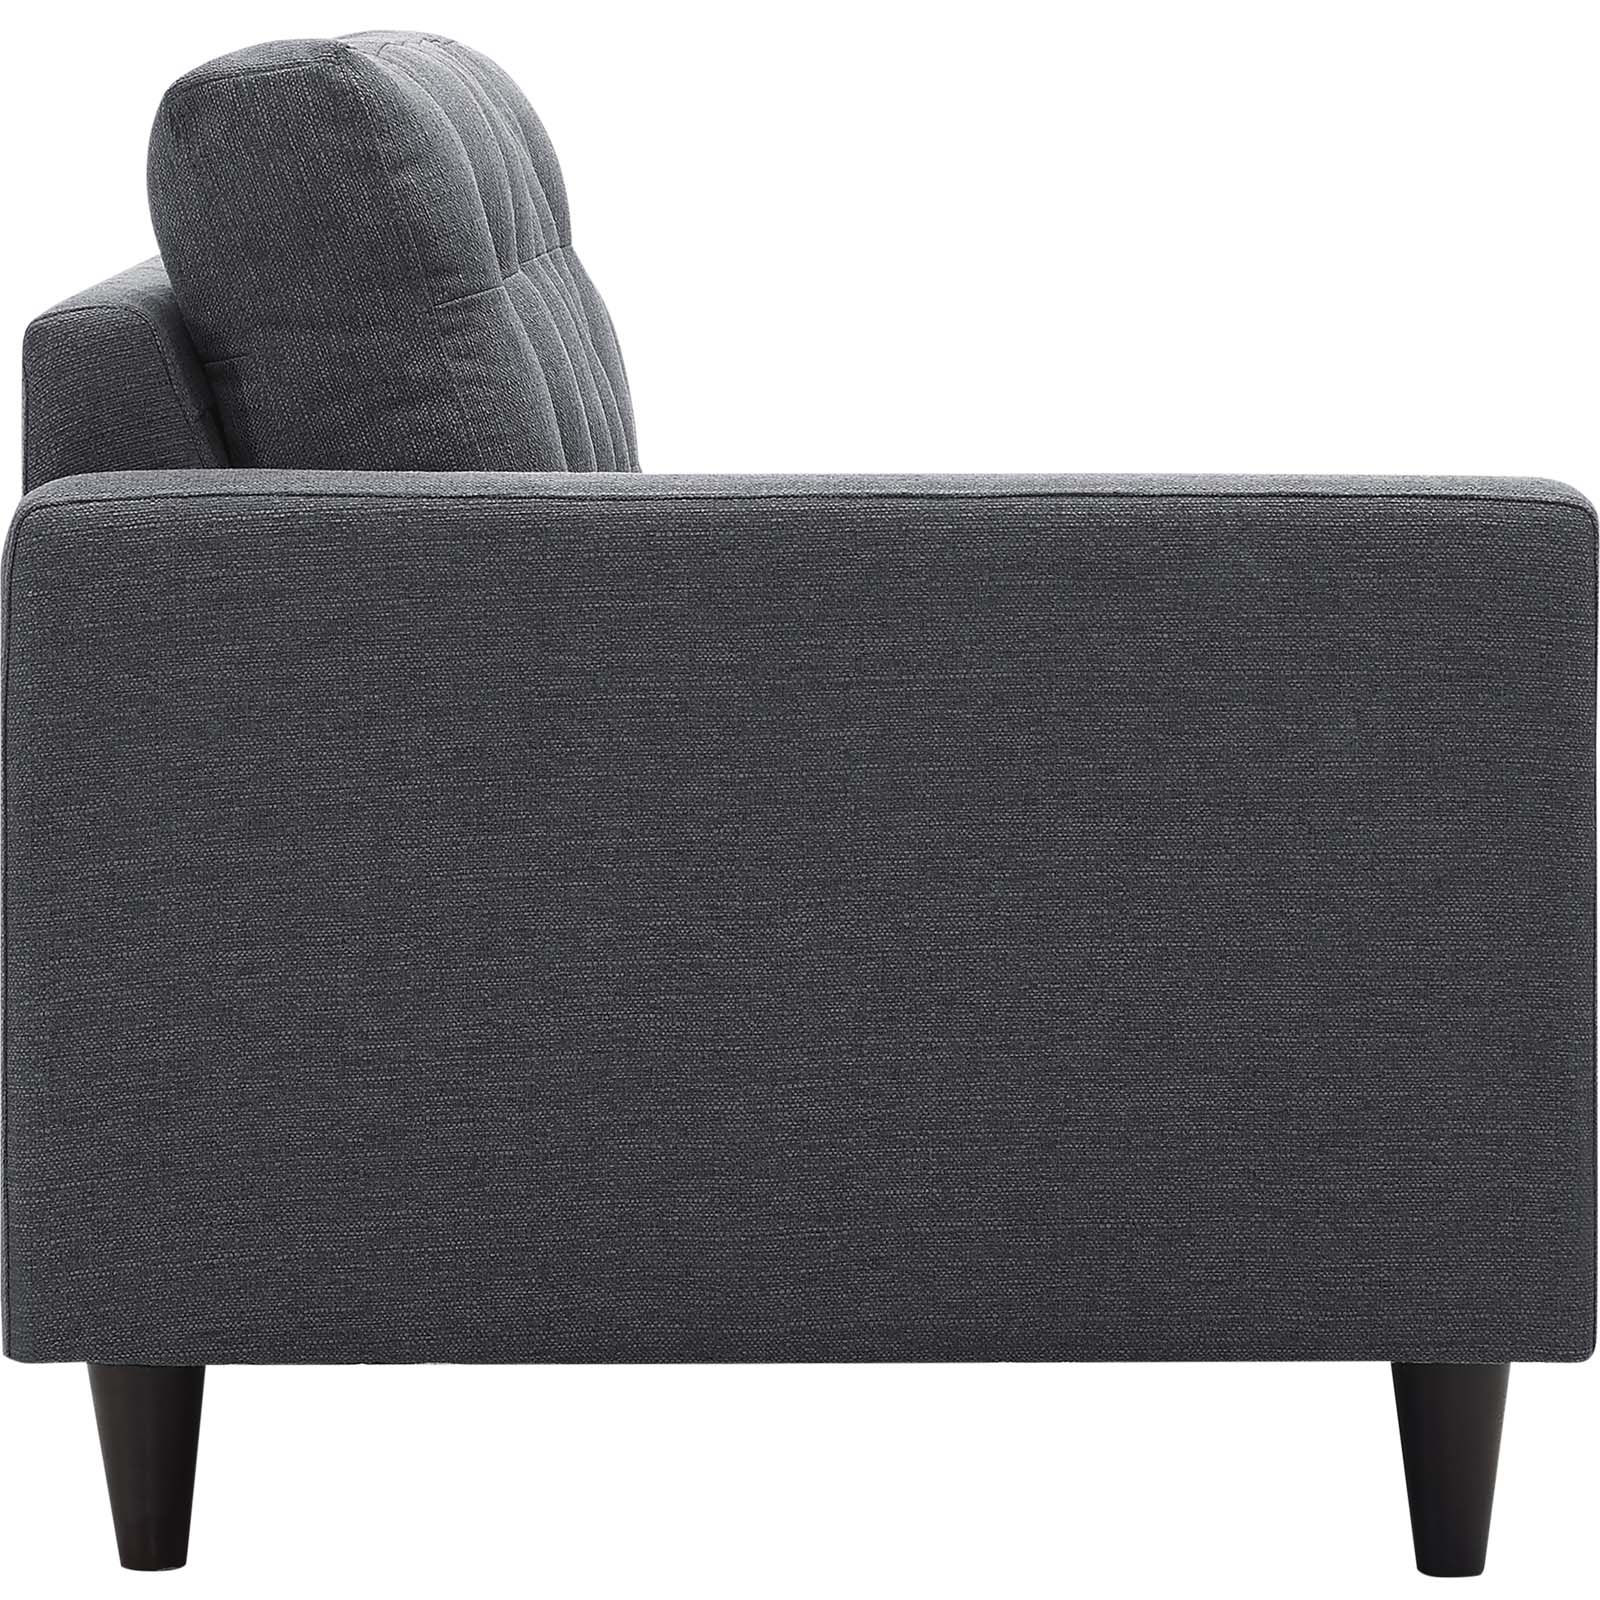 Empress 2 Piece Upholstered Fabric Right Facing Bumper Sectional - East Shore Modern Home Furnishings